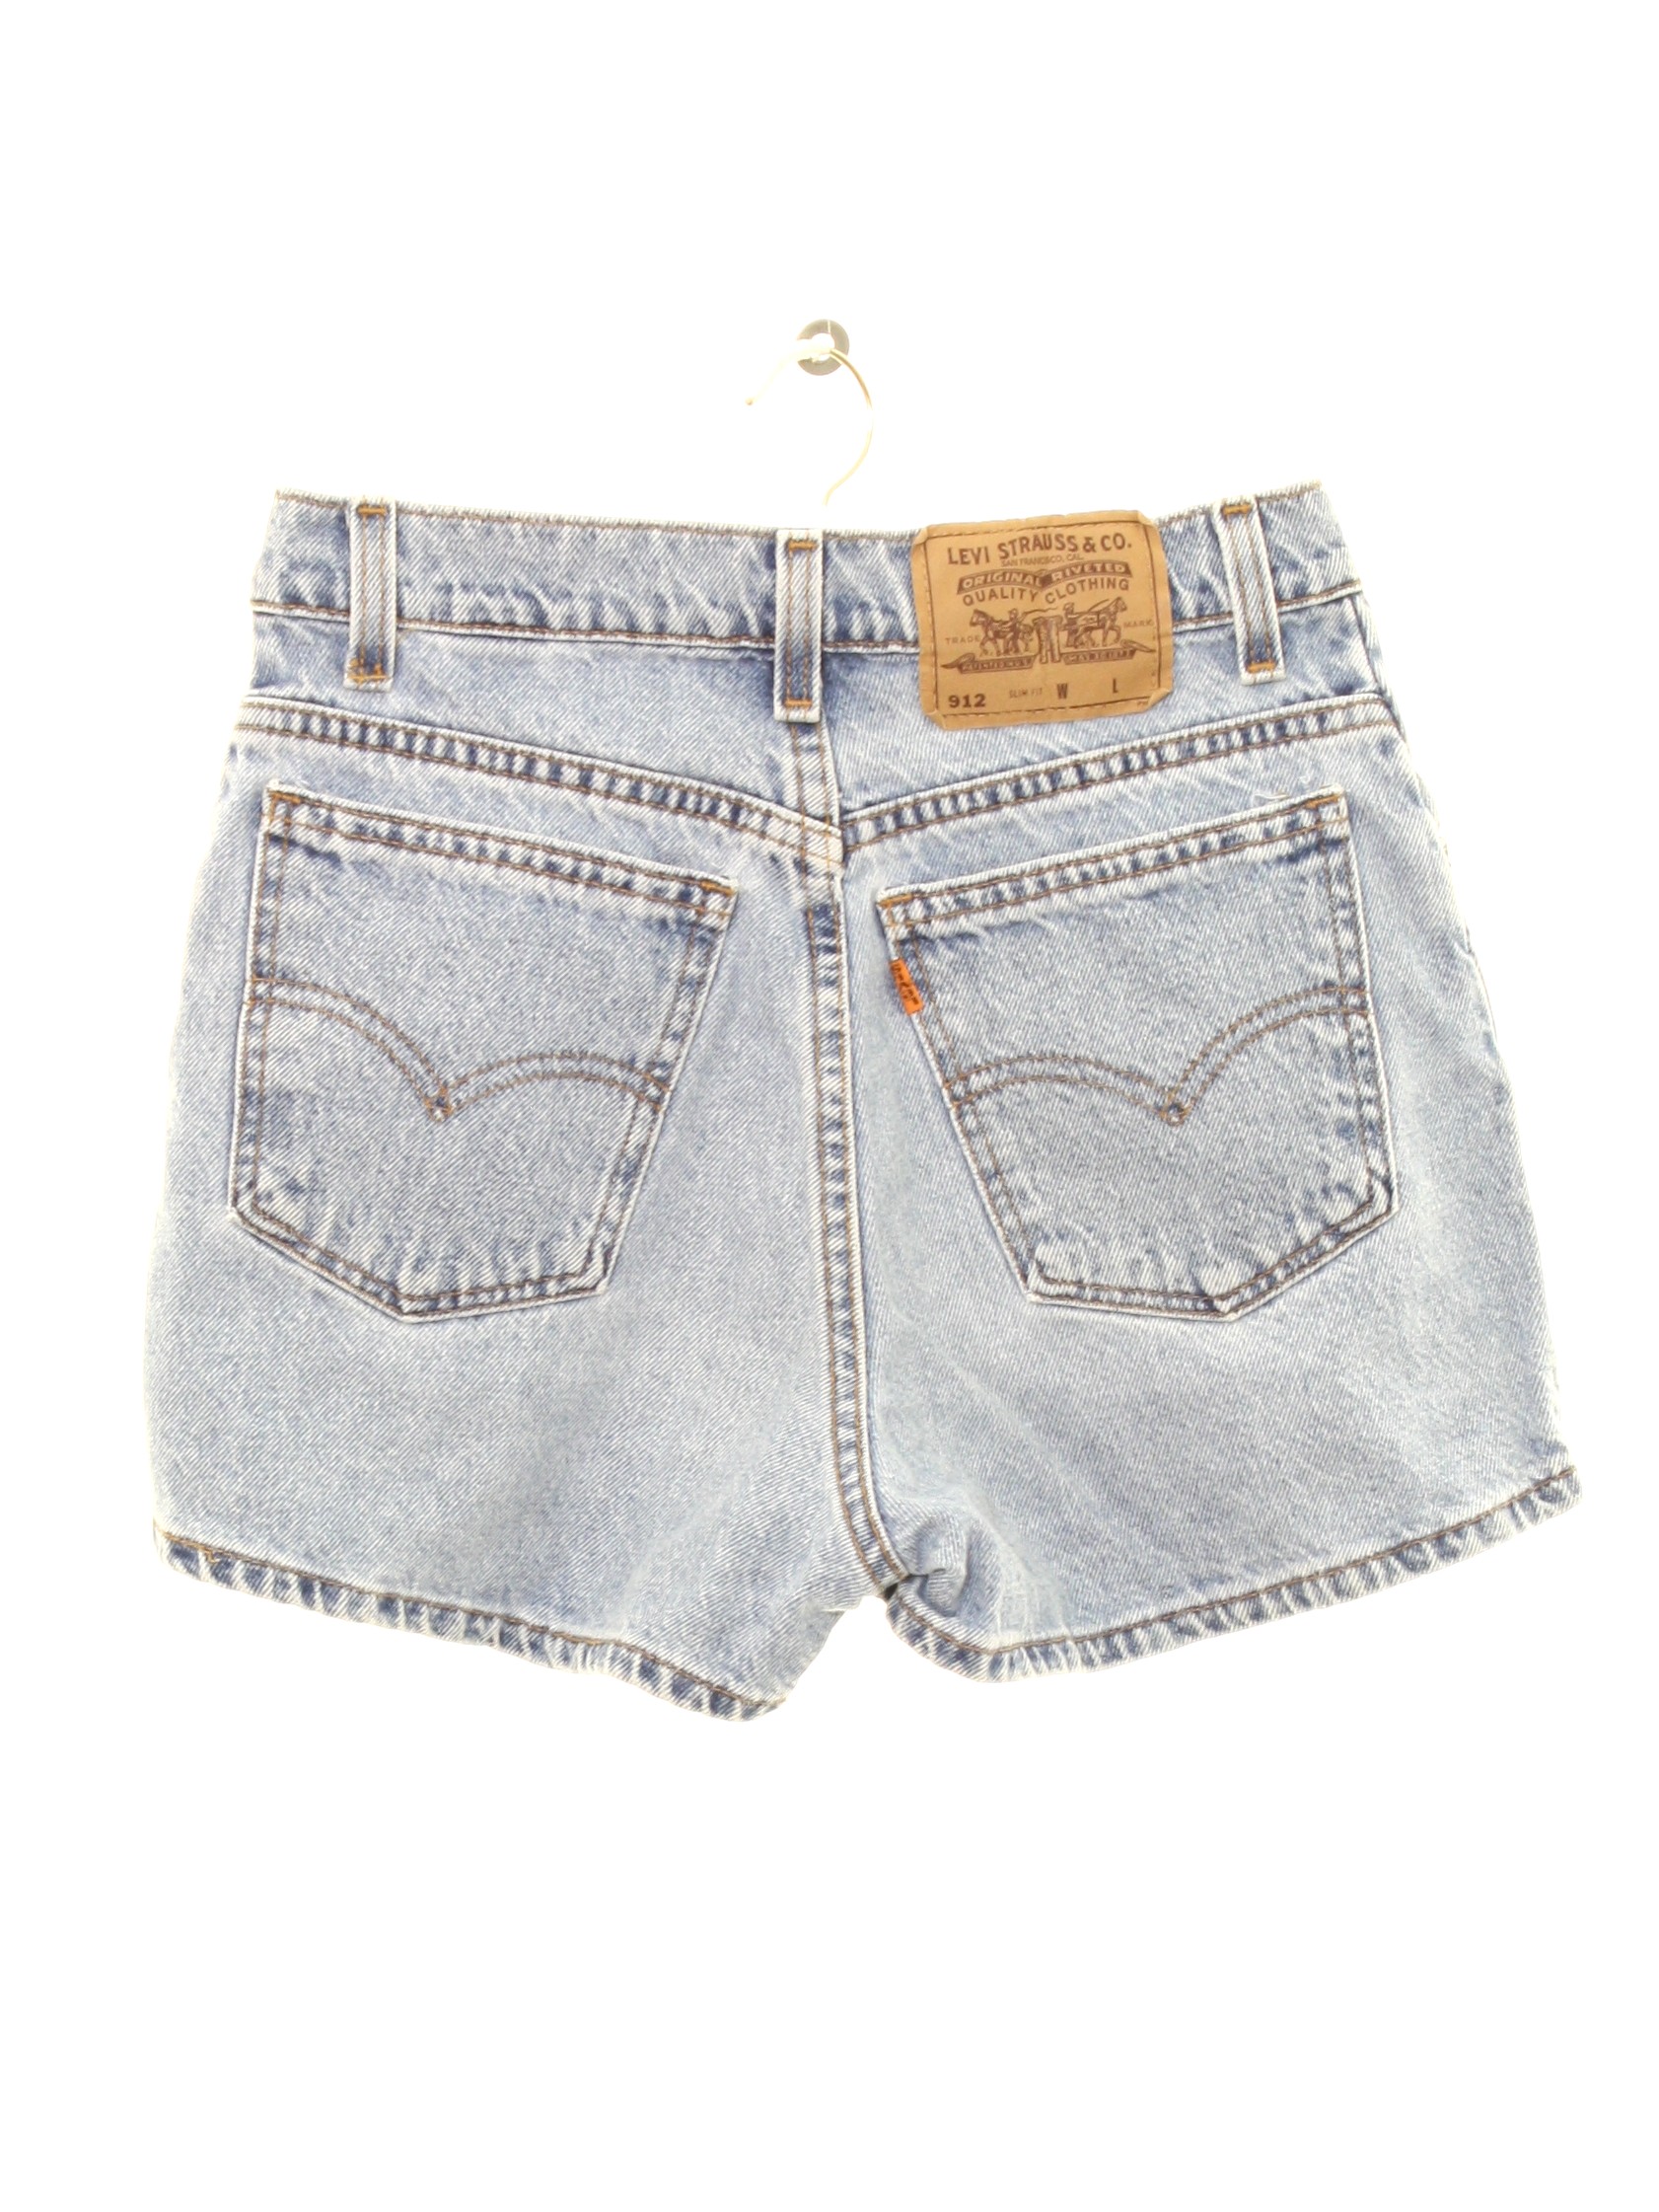 Vintage 1980's Shorts: Late 80s or Early 90s -Levis 912- Womens light blue  wash cotton high rise denim mom shorts/jorts. These are the 912 slim fit,  which is just the older style